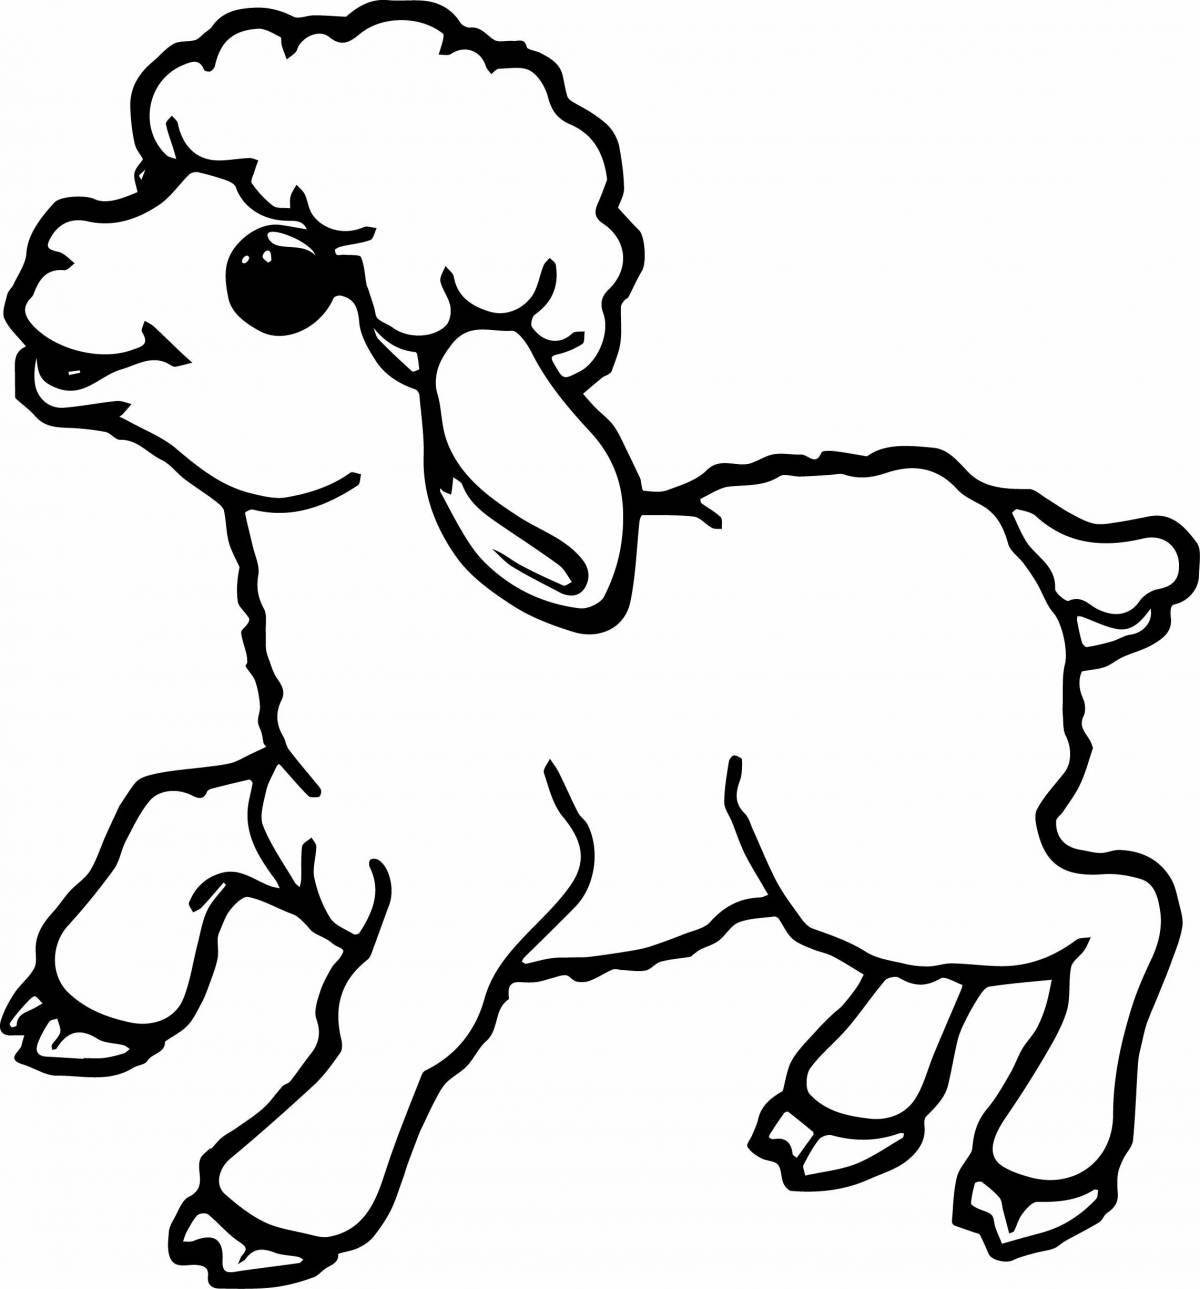 Cute sheep coloring book for kids